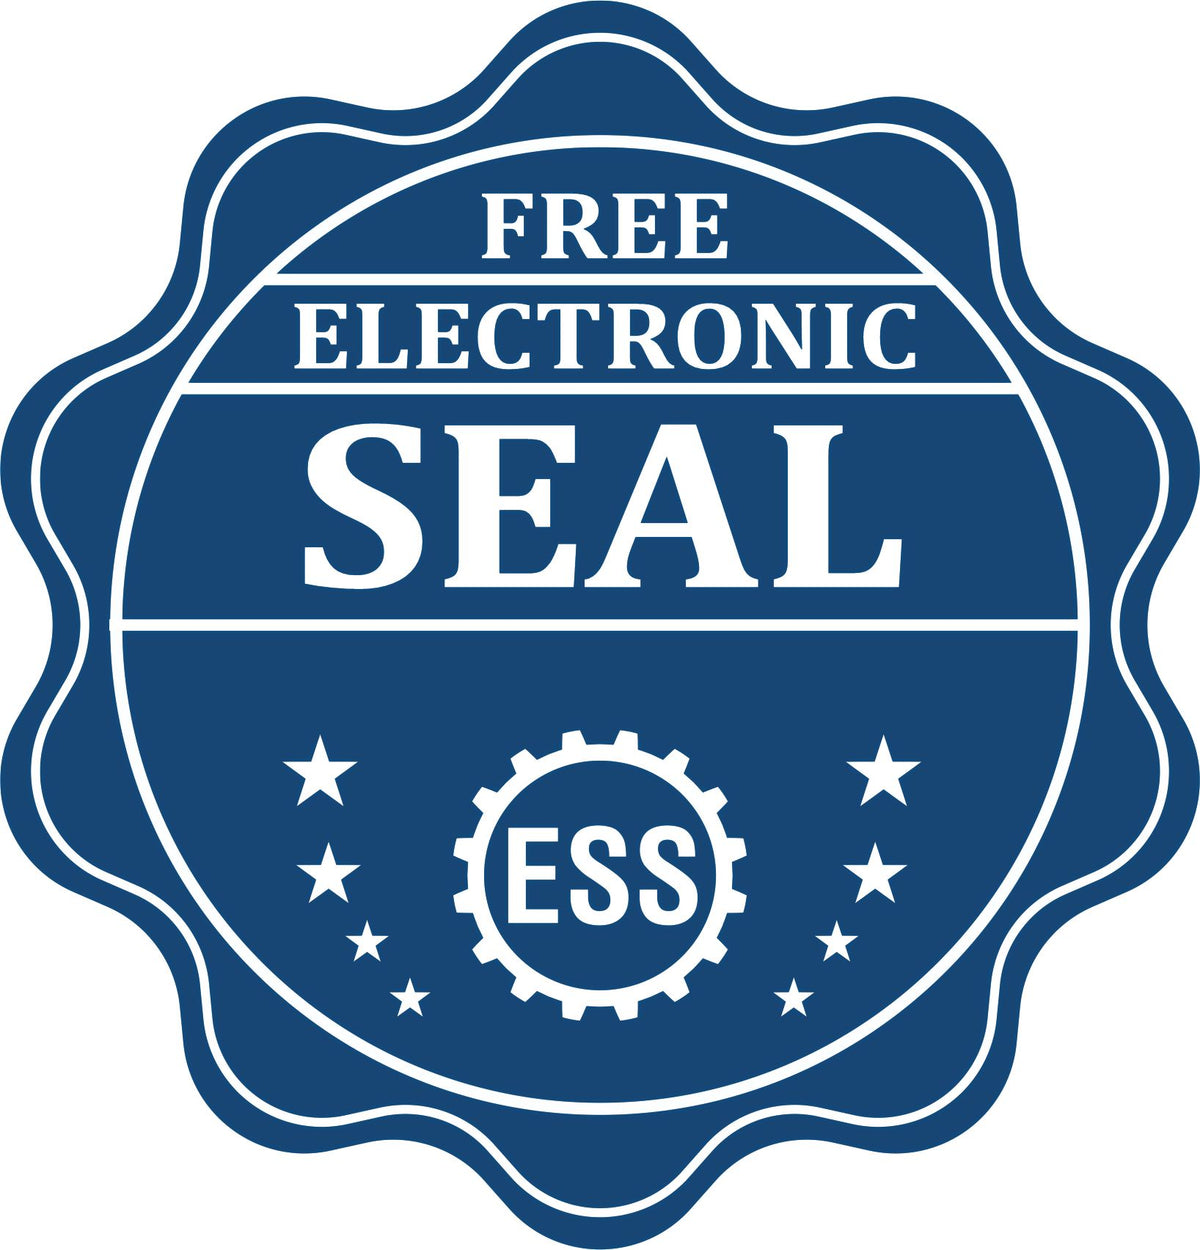 A badge showing a free electronic seal for the Maine Engineer Desk Seal with stars and the ESS gear on the emblem.